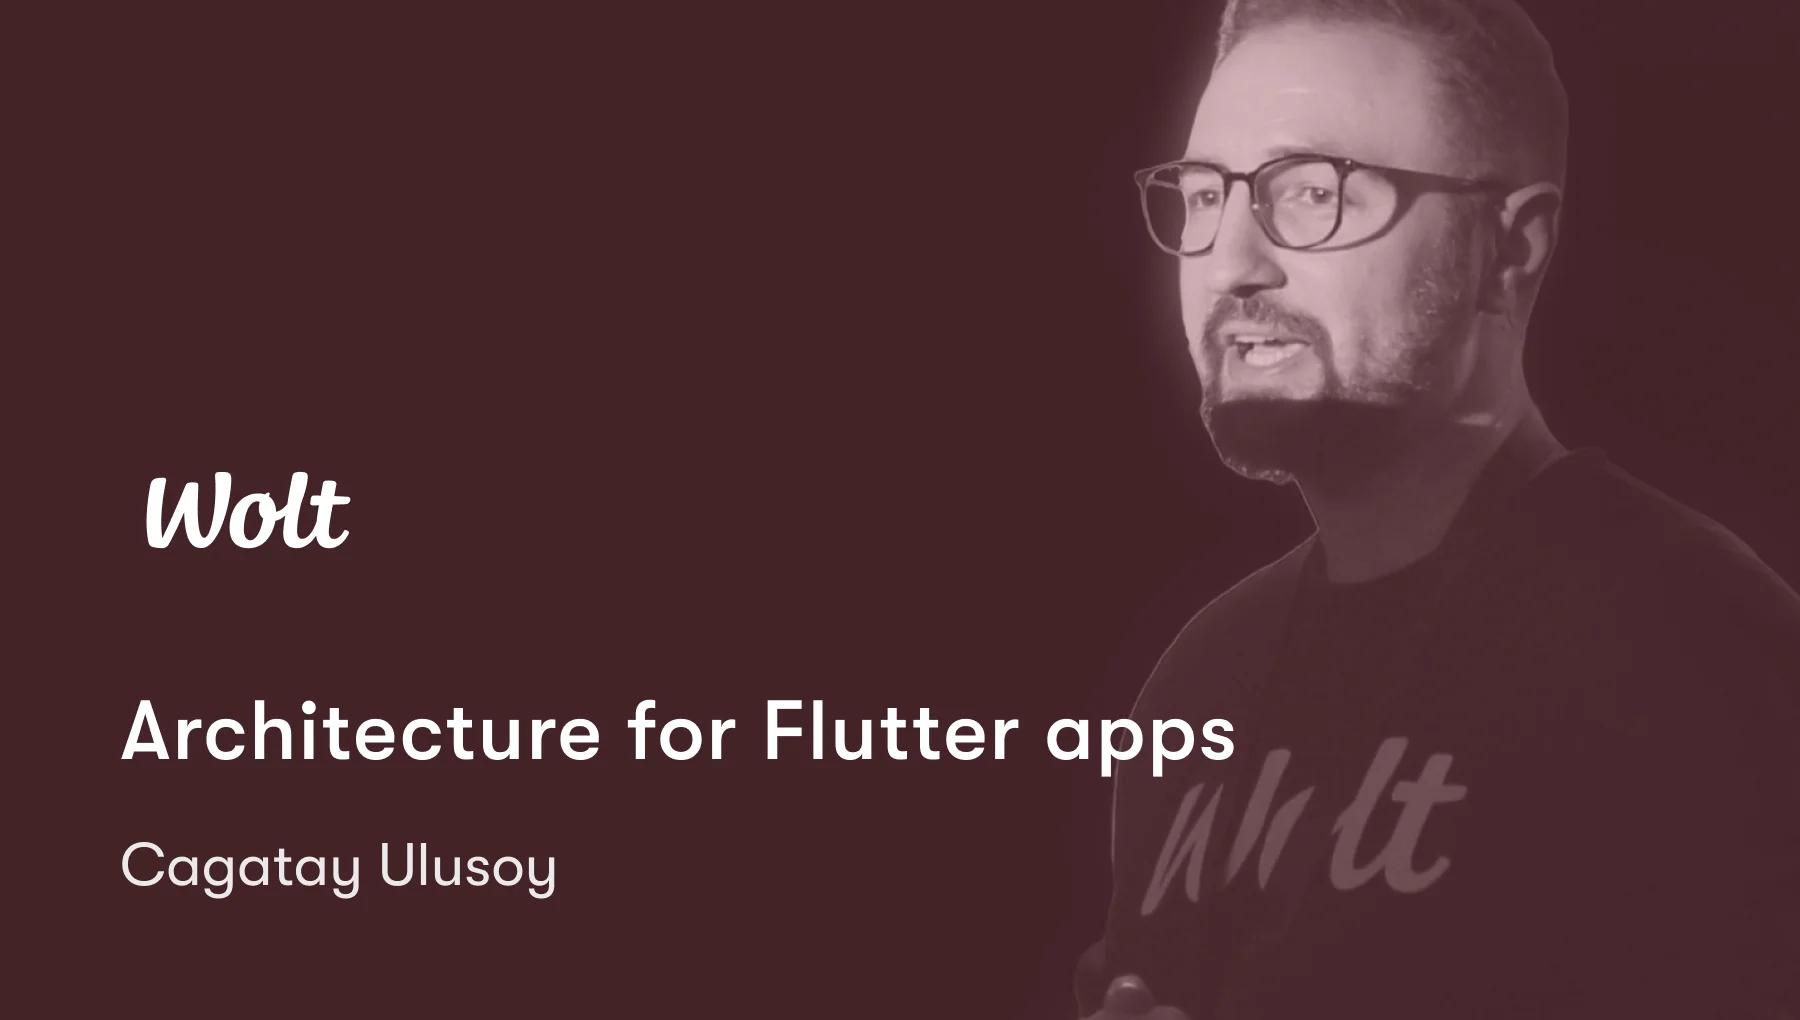 Architecture for Flutter apps by Cagatay Ulusoy